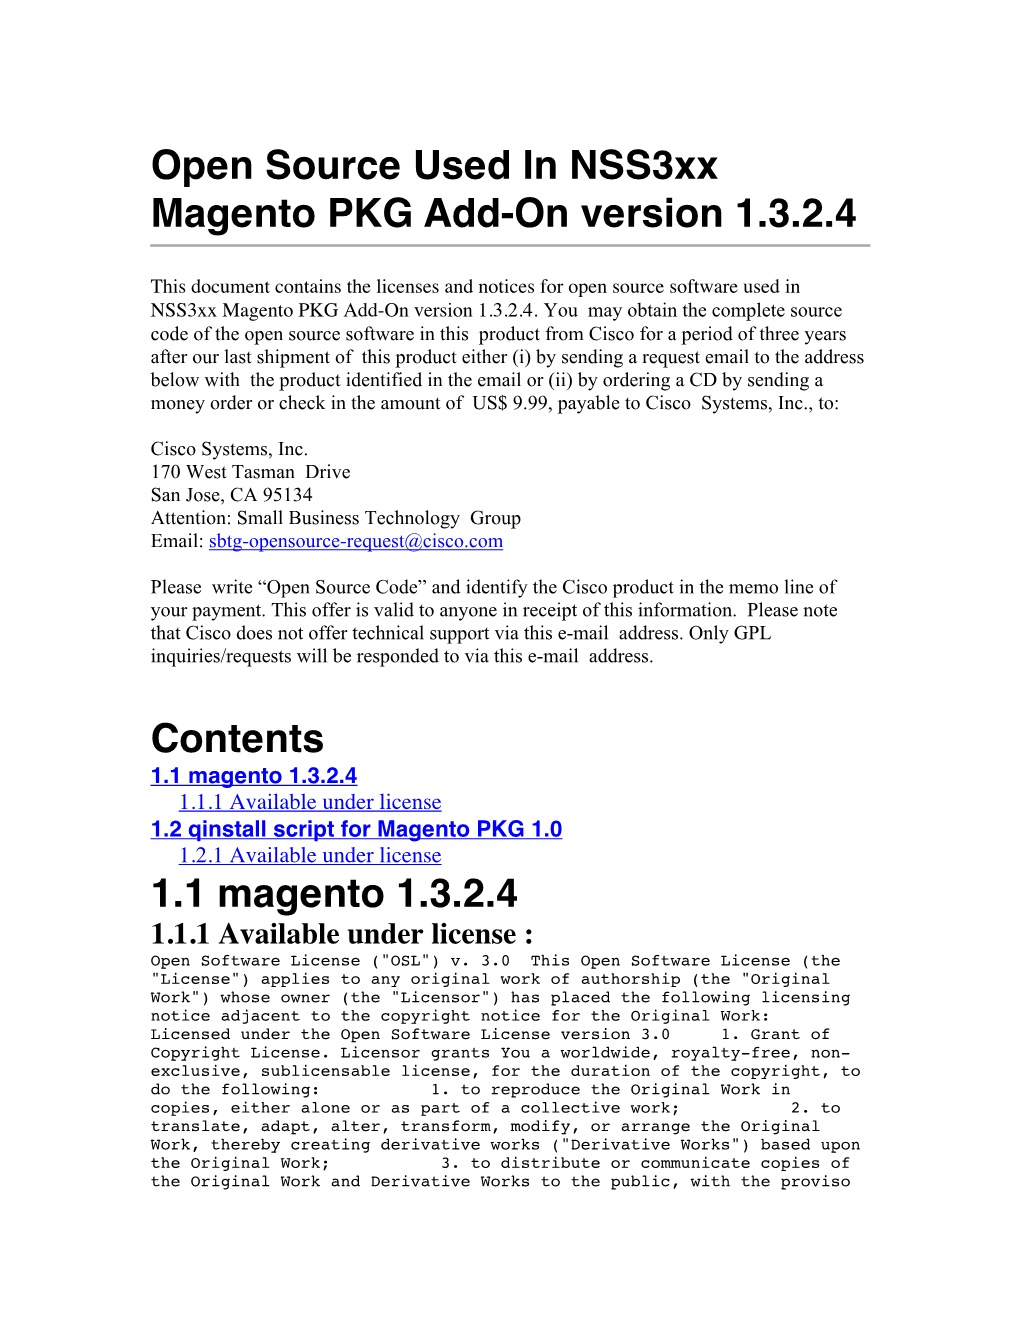 Open Source Used in Nss3xx Magento PKG Add-On Version 1.3.2.4